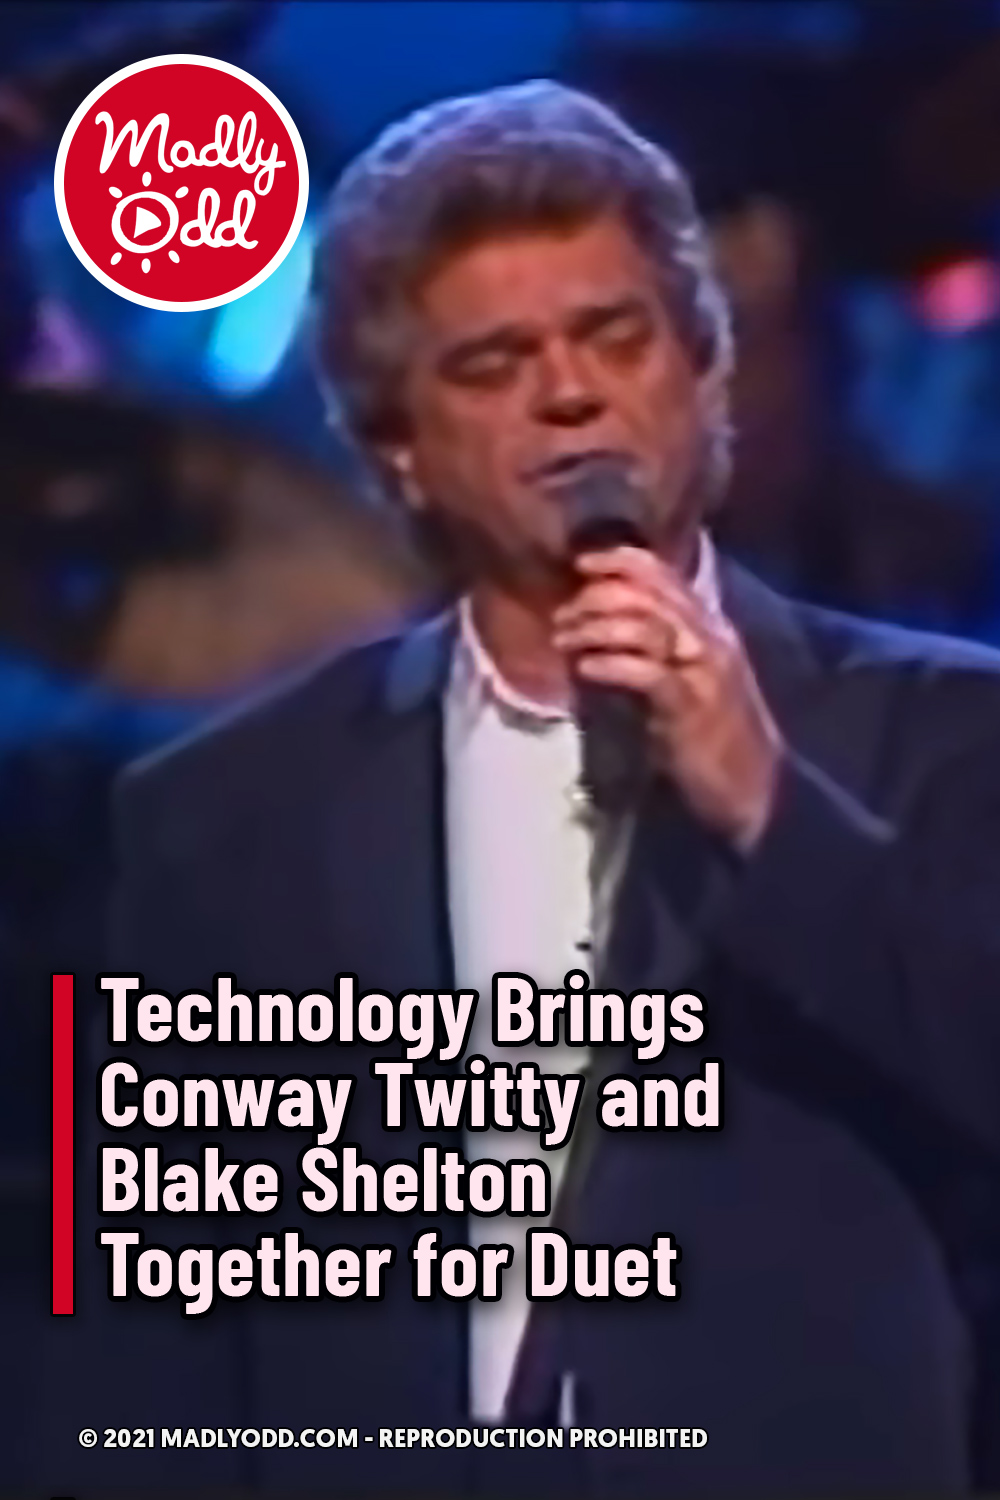 Technology Brings Conway Twitty and Blake Shelton Together for Duet